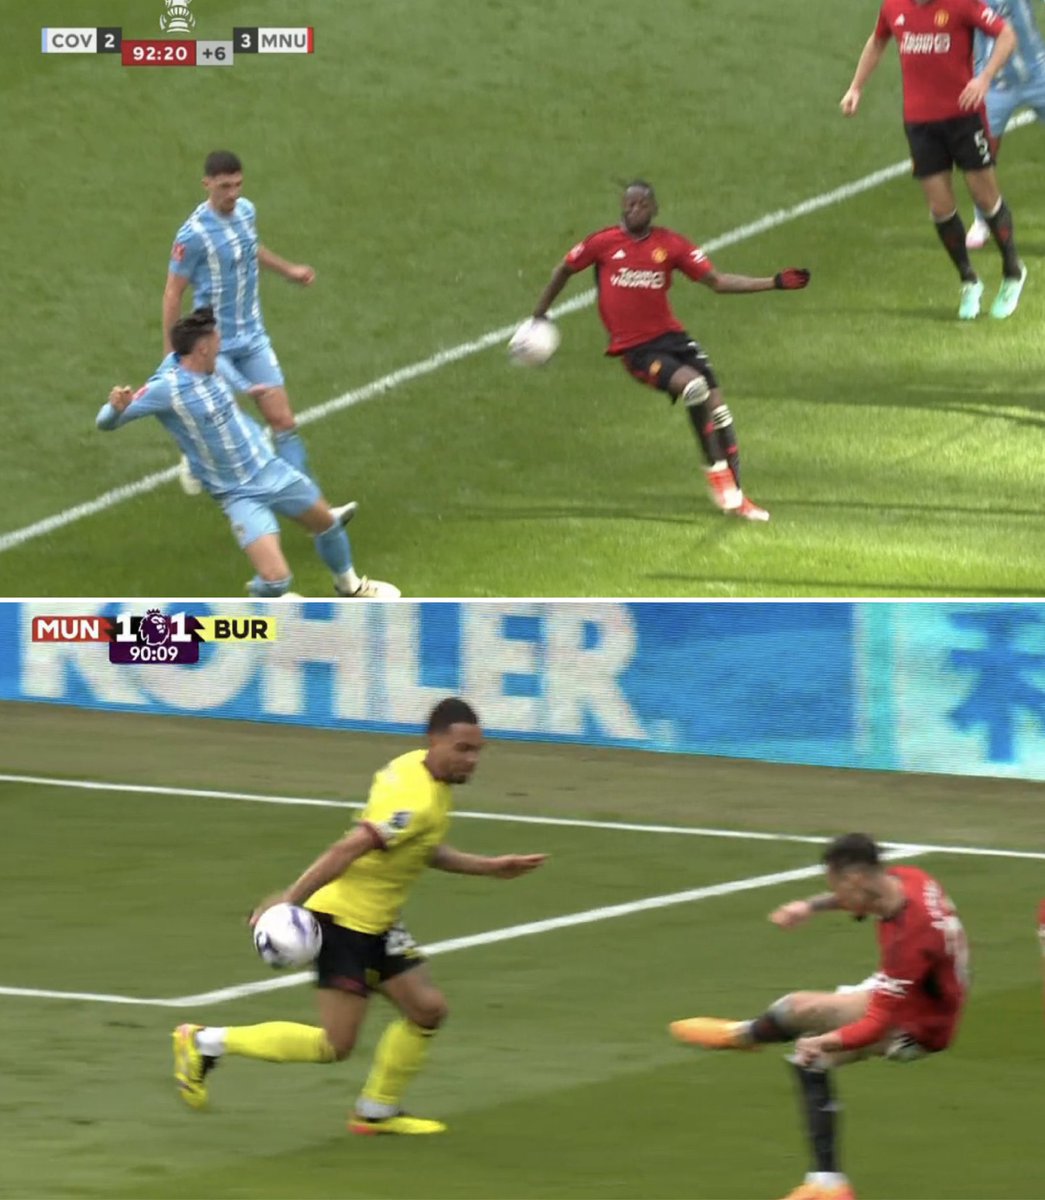 Every football fan should be calling this out like I have when it's Liverpool, Arsenal etc. It's not about badge you support it's about the destruction of our game. It's disgusting that VAR officiasl are allowing this inconsistency. I hope @manutd say something